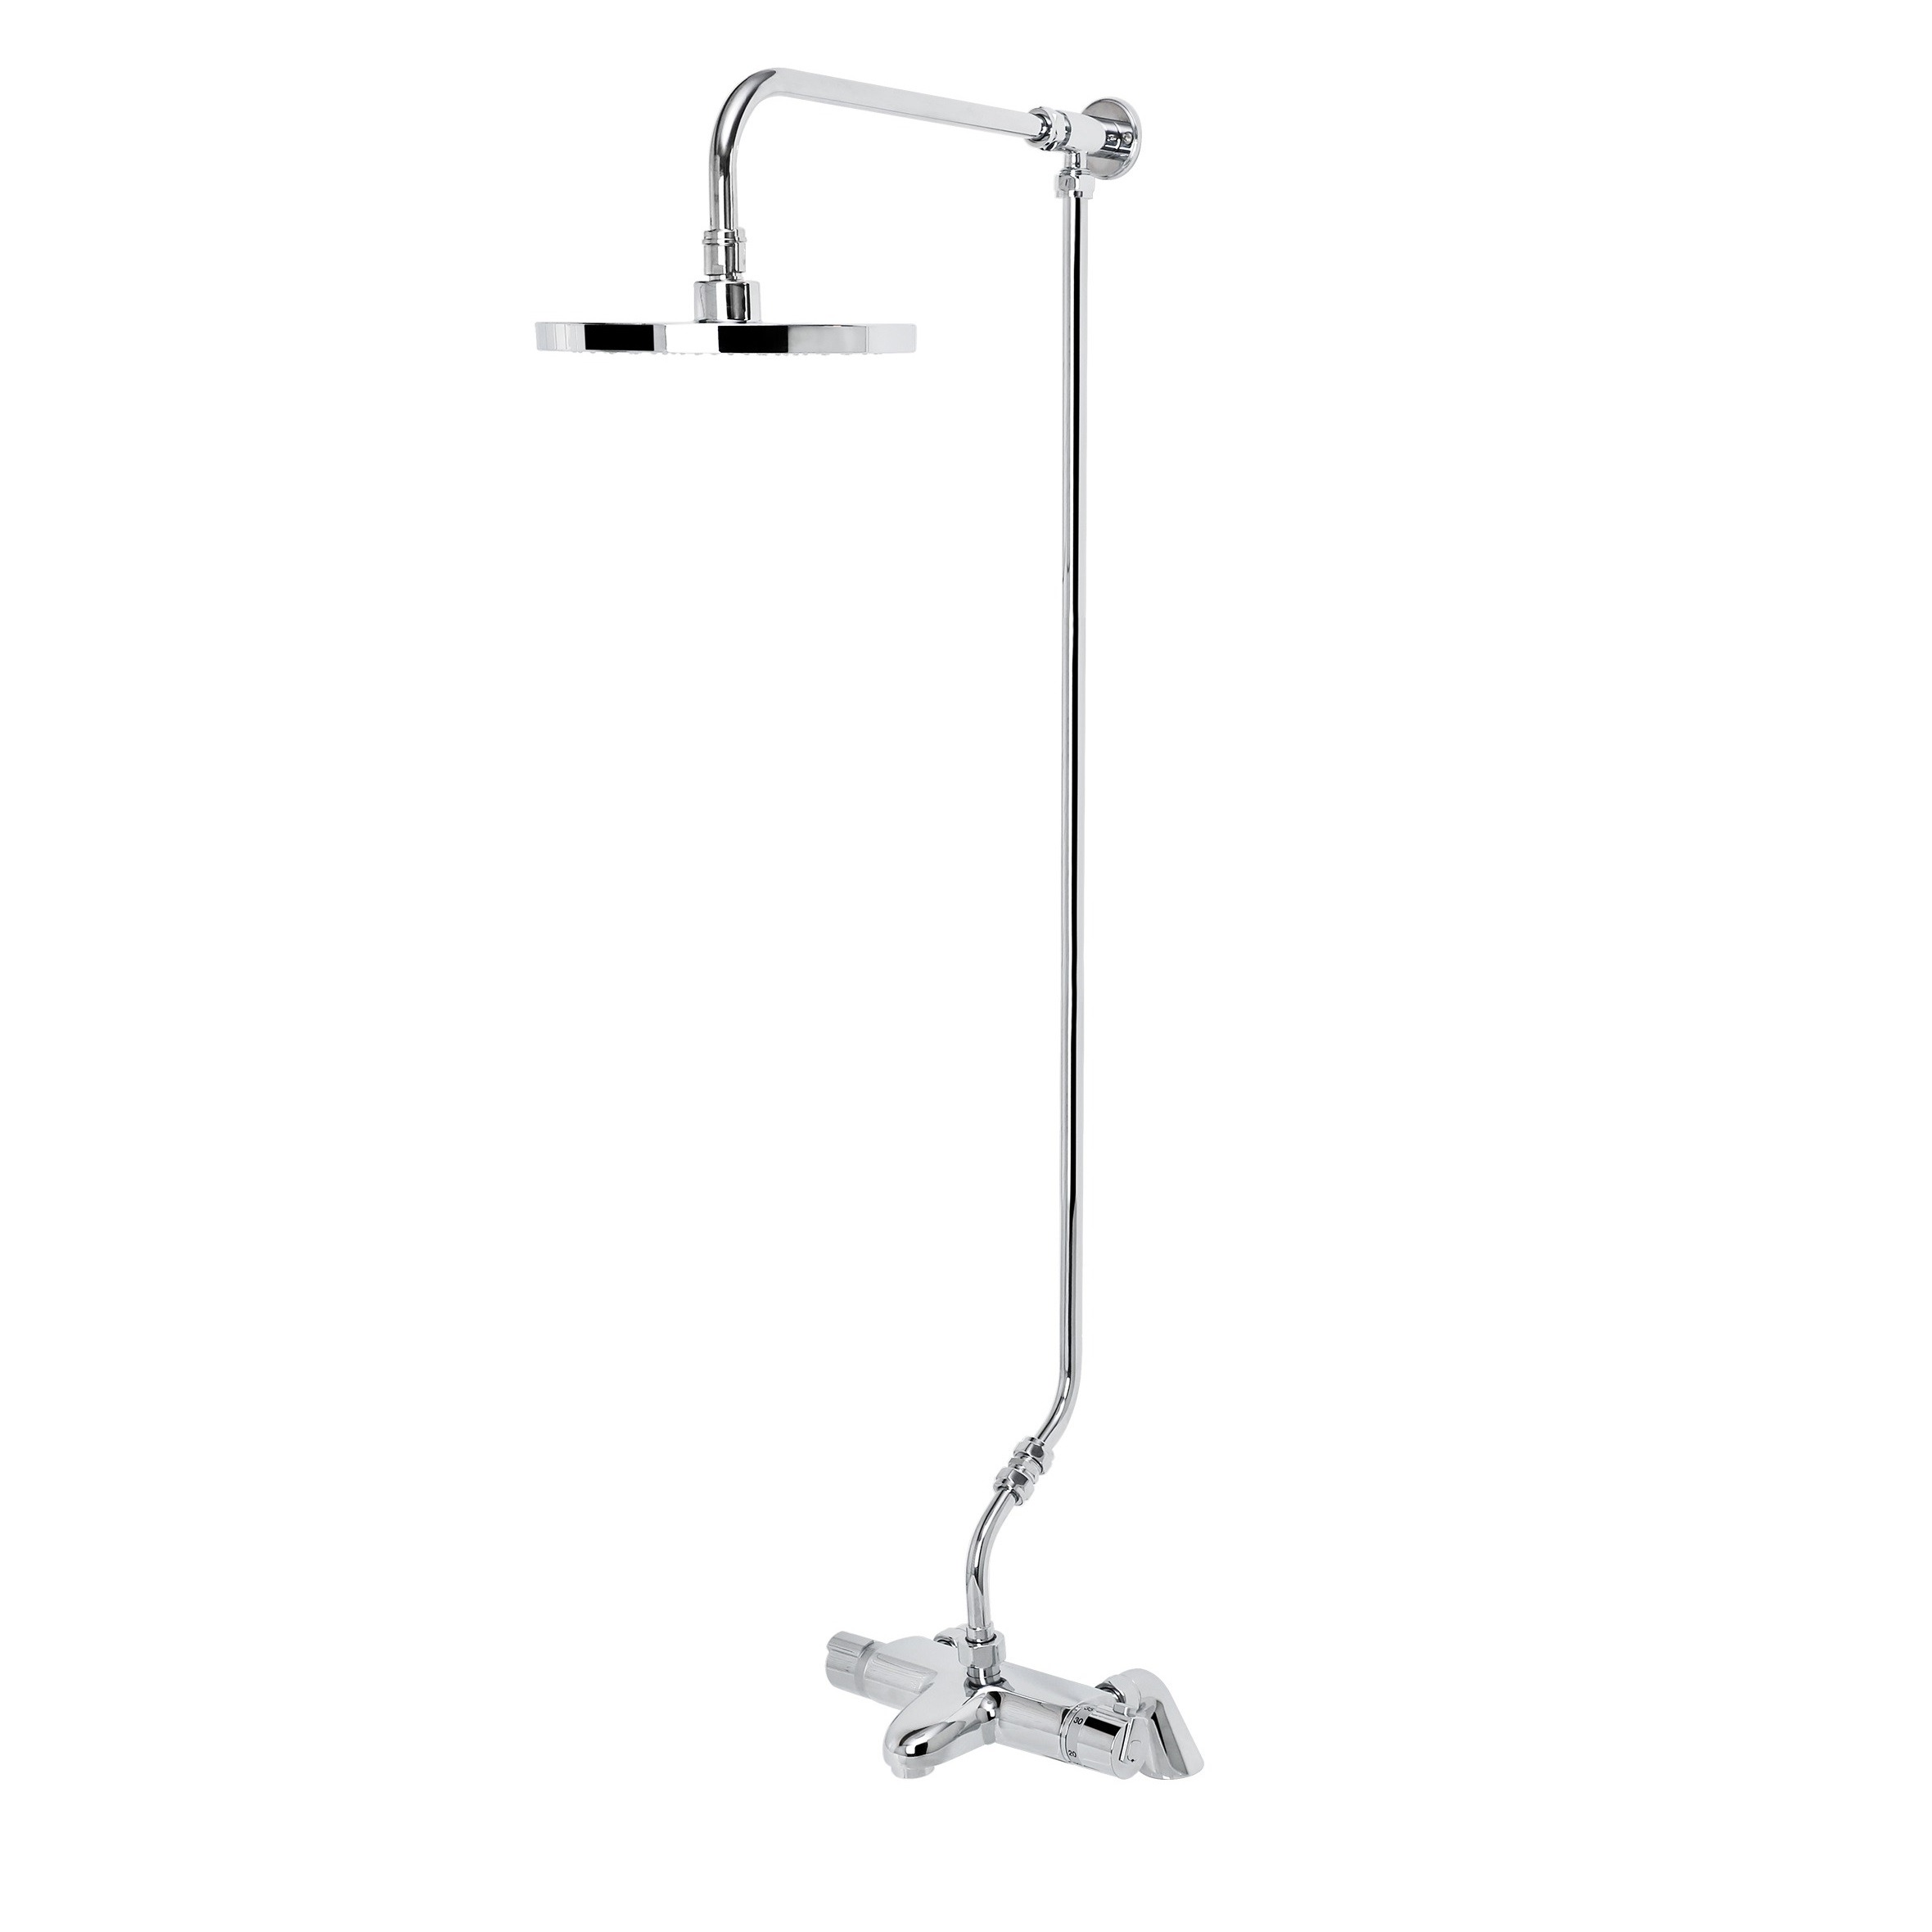 Bristan Assure TMV2 Deck Mounted Thermostatic Bath Shower Mixer With Fixed Head Kit